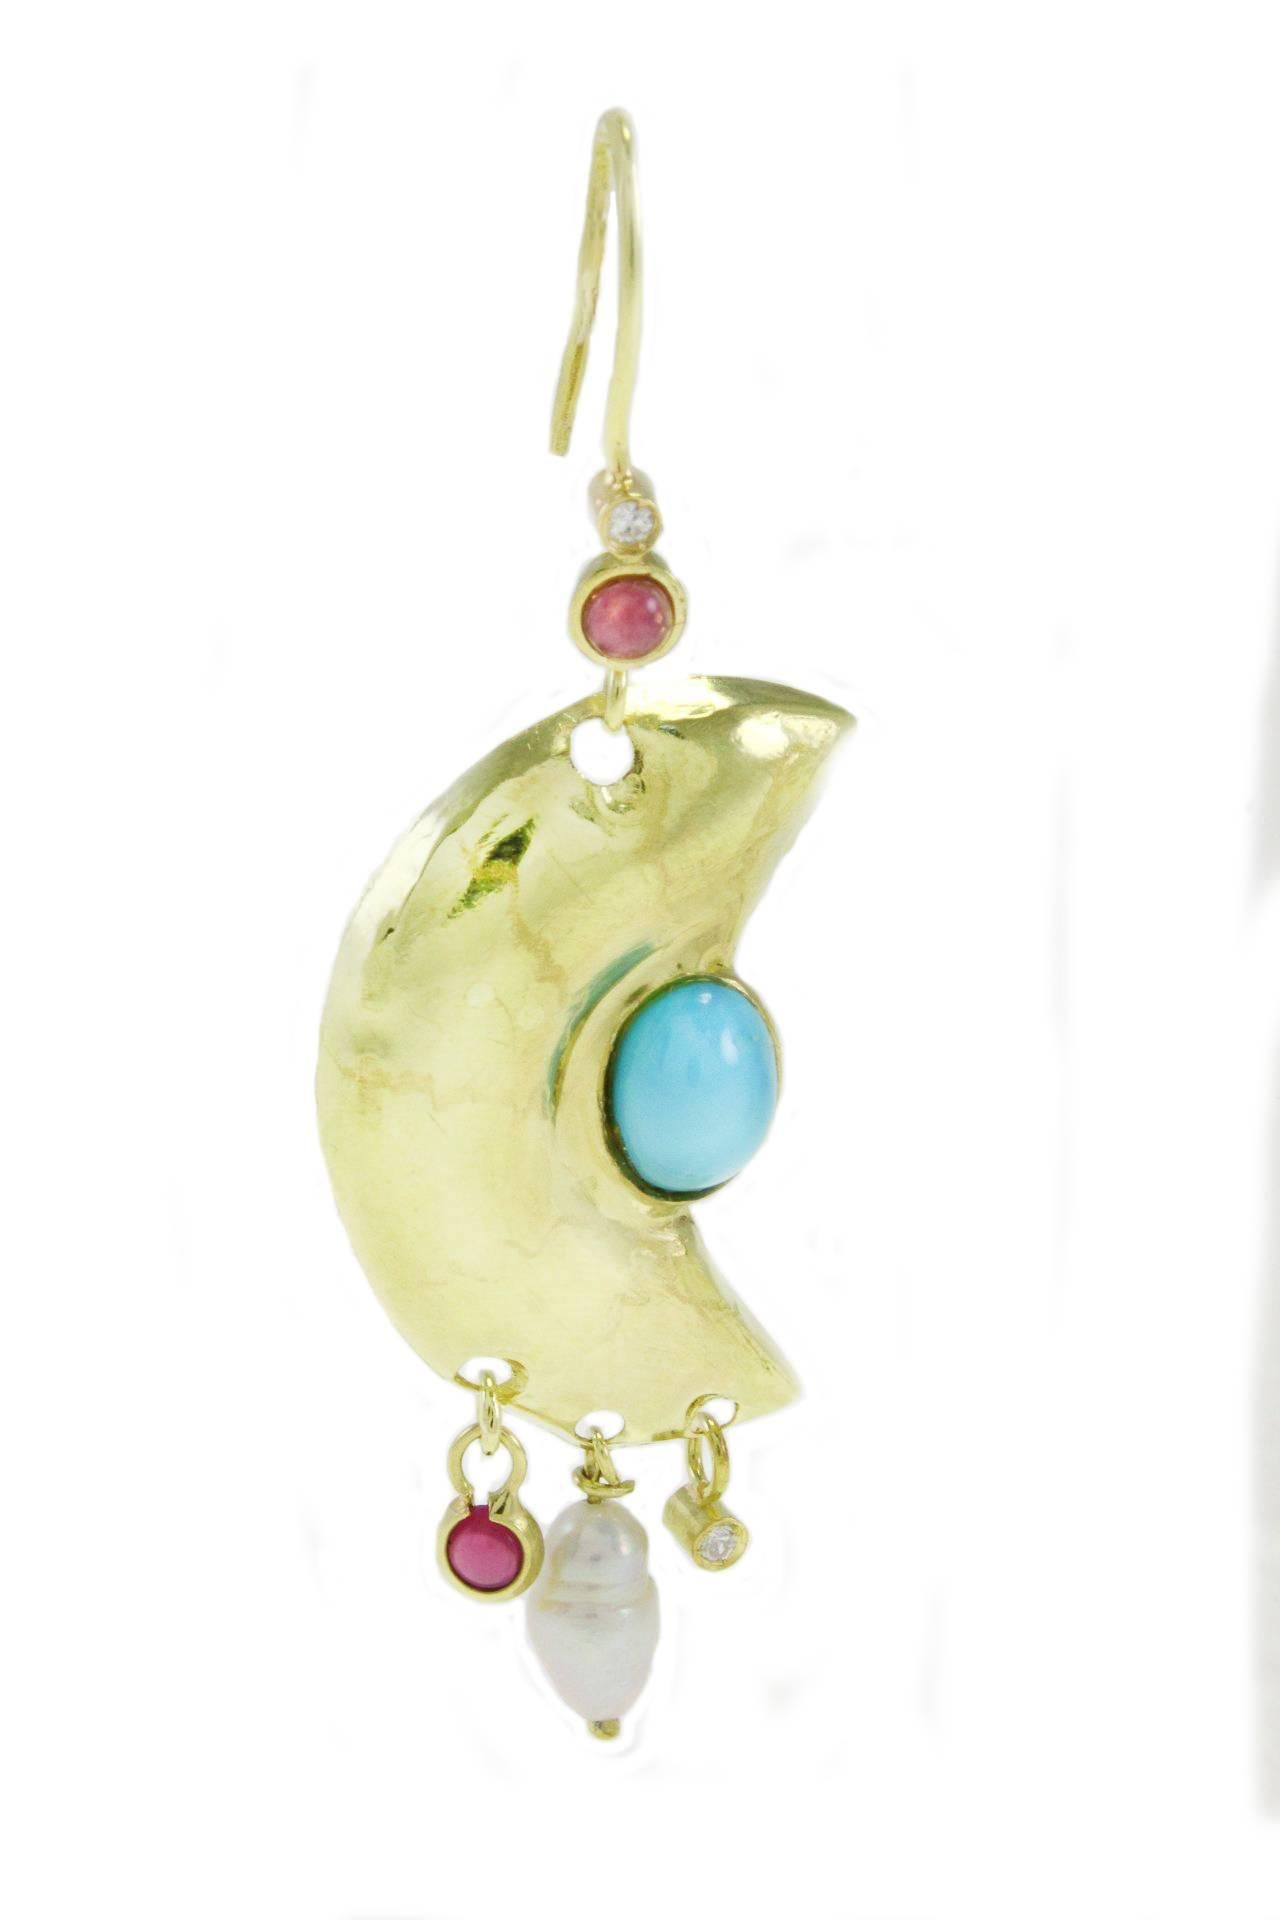 Amazing moon shaped earrings in 18Kt yellow gold with a little circle of turquoise  with little drops of diamonds, garnet and pearls.

diamonds (0.04Kt) 
garnet (0.98 Kt) 
little pearl (0.50 gr). 
turquoise (0.80gr)
Rf. 18831
US Size
Width 0.67